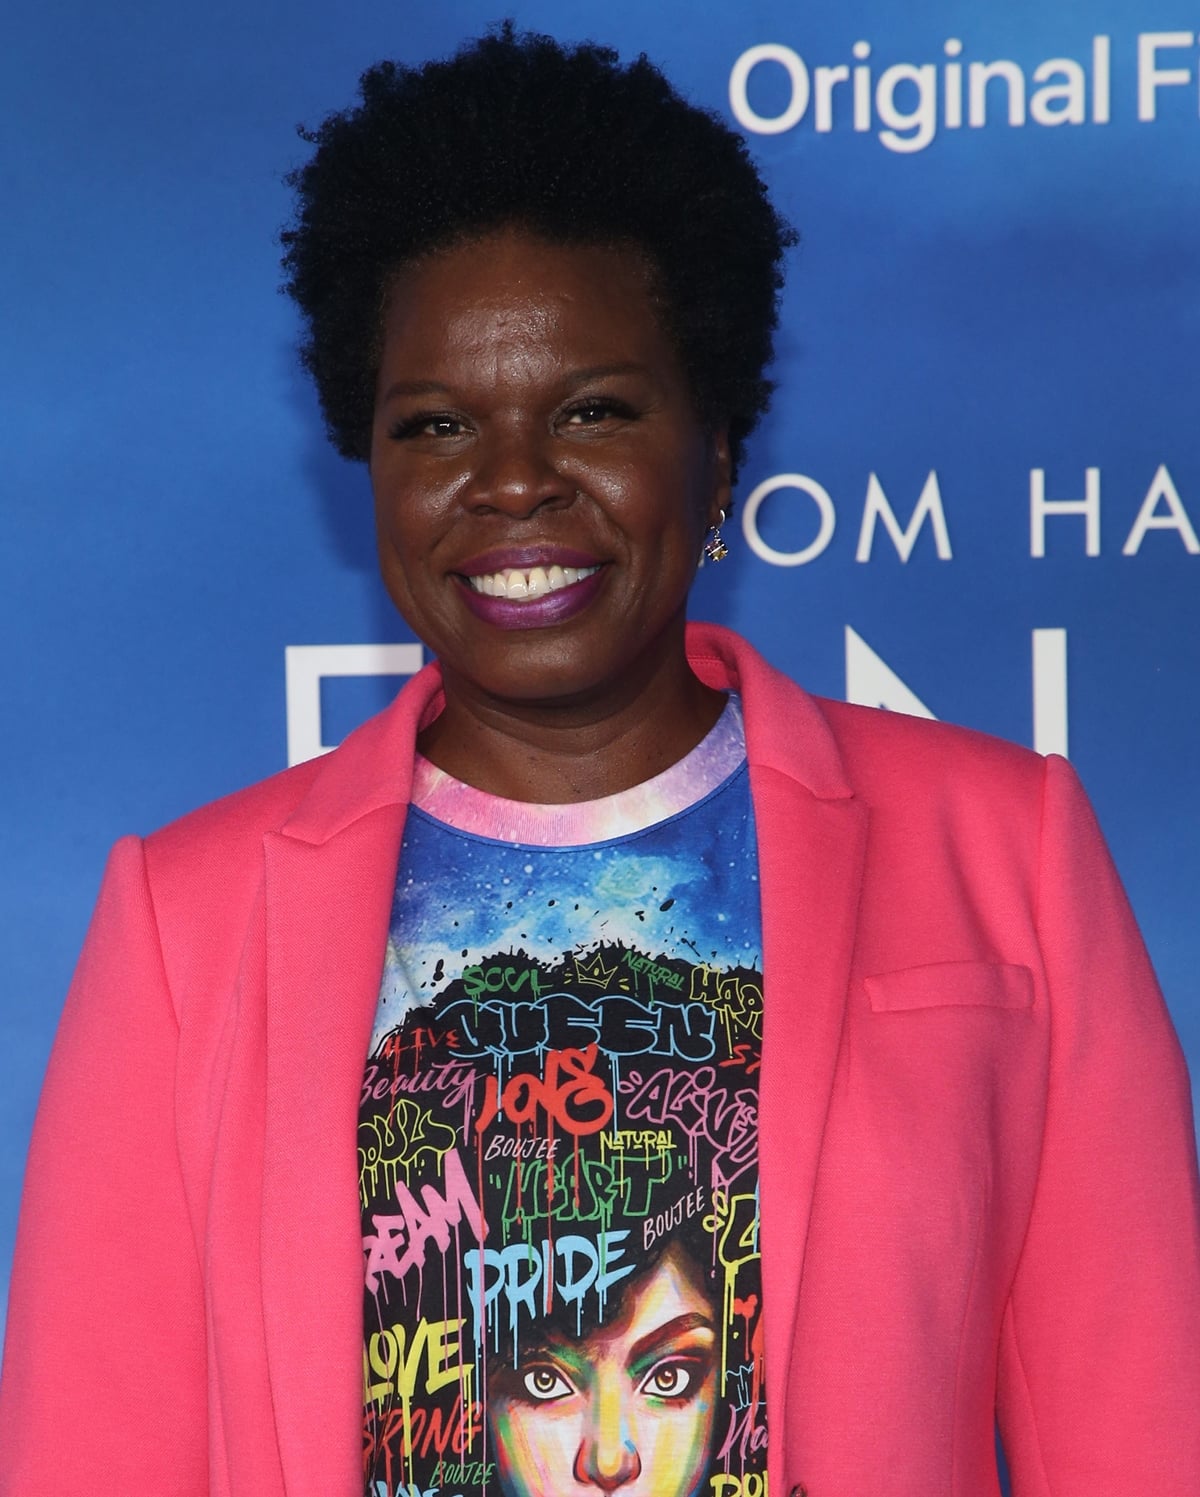 Leslie Jones claims she's not gay but that she'd get a lot of women if she were lesbian